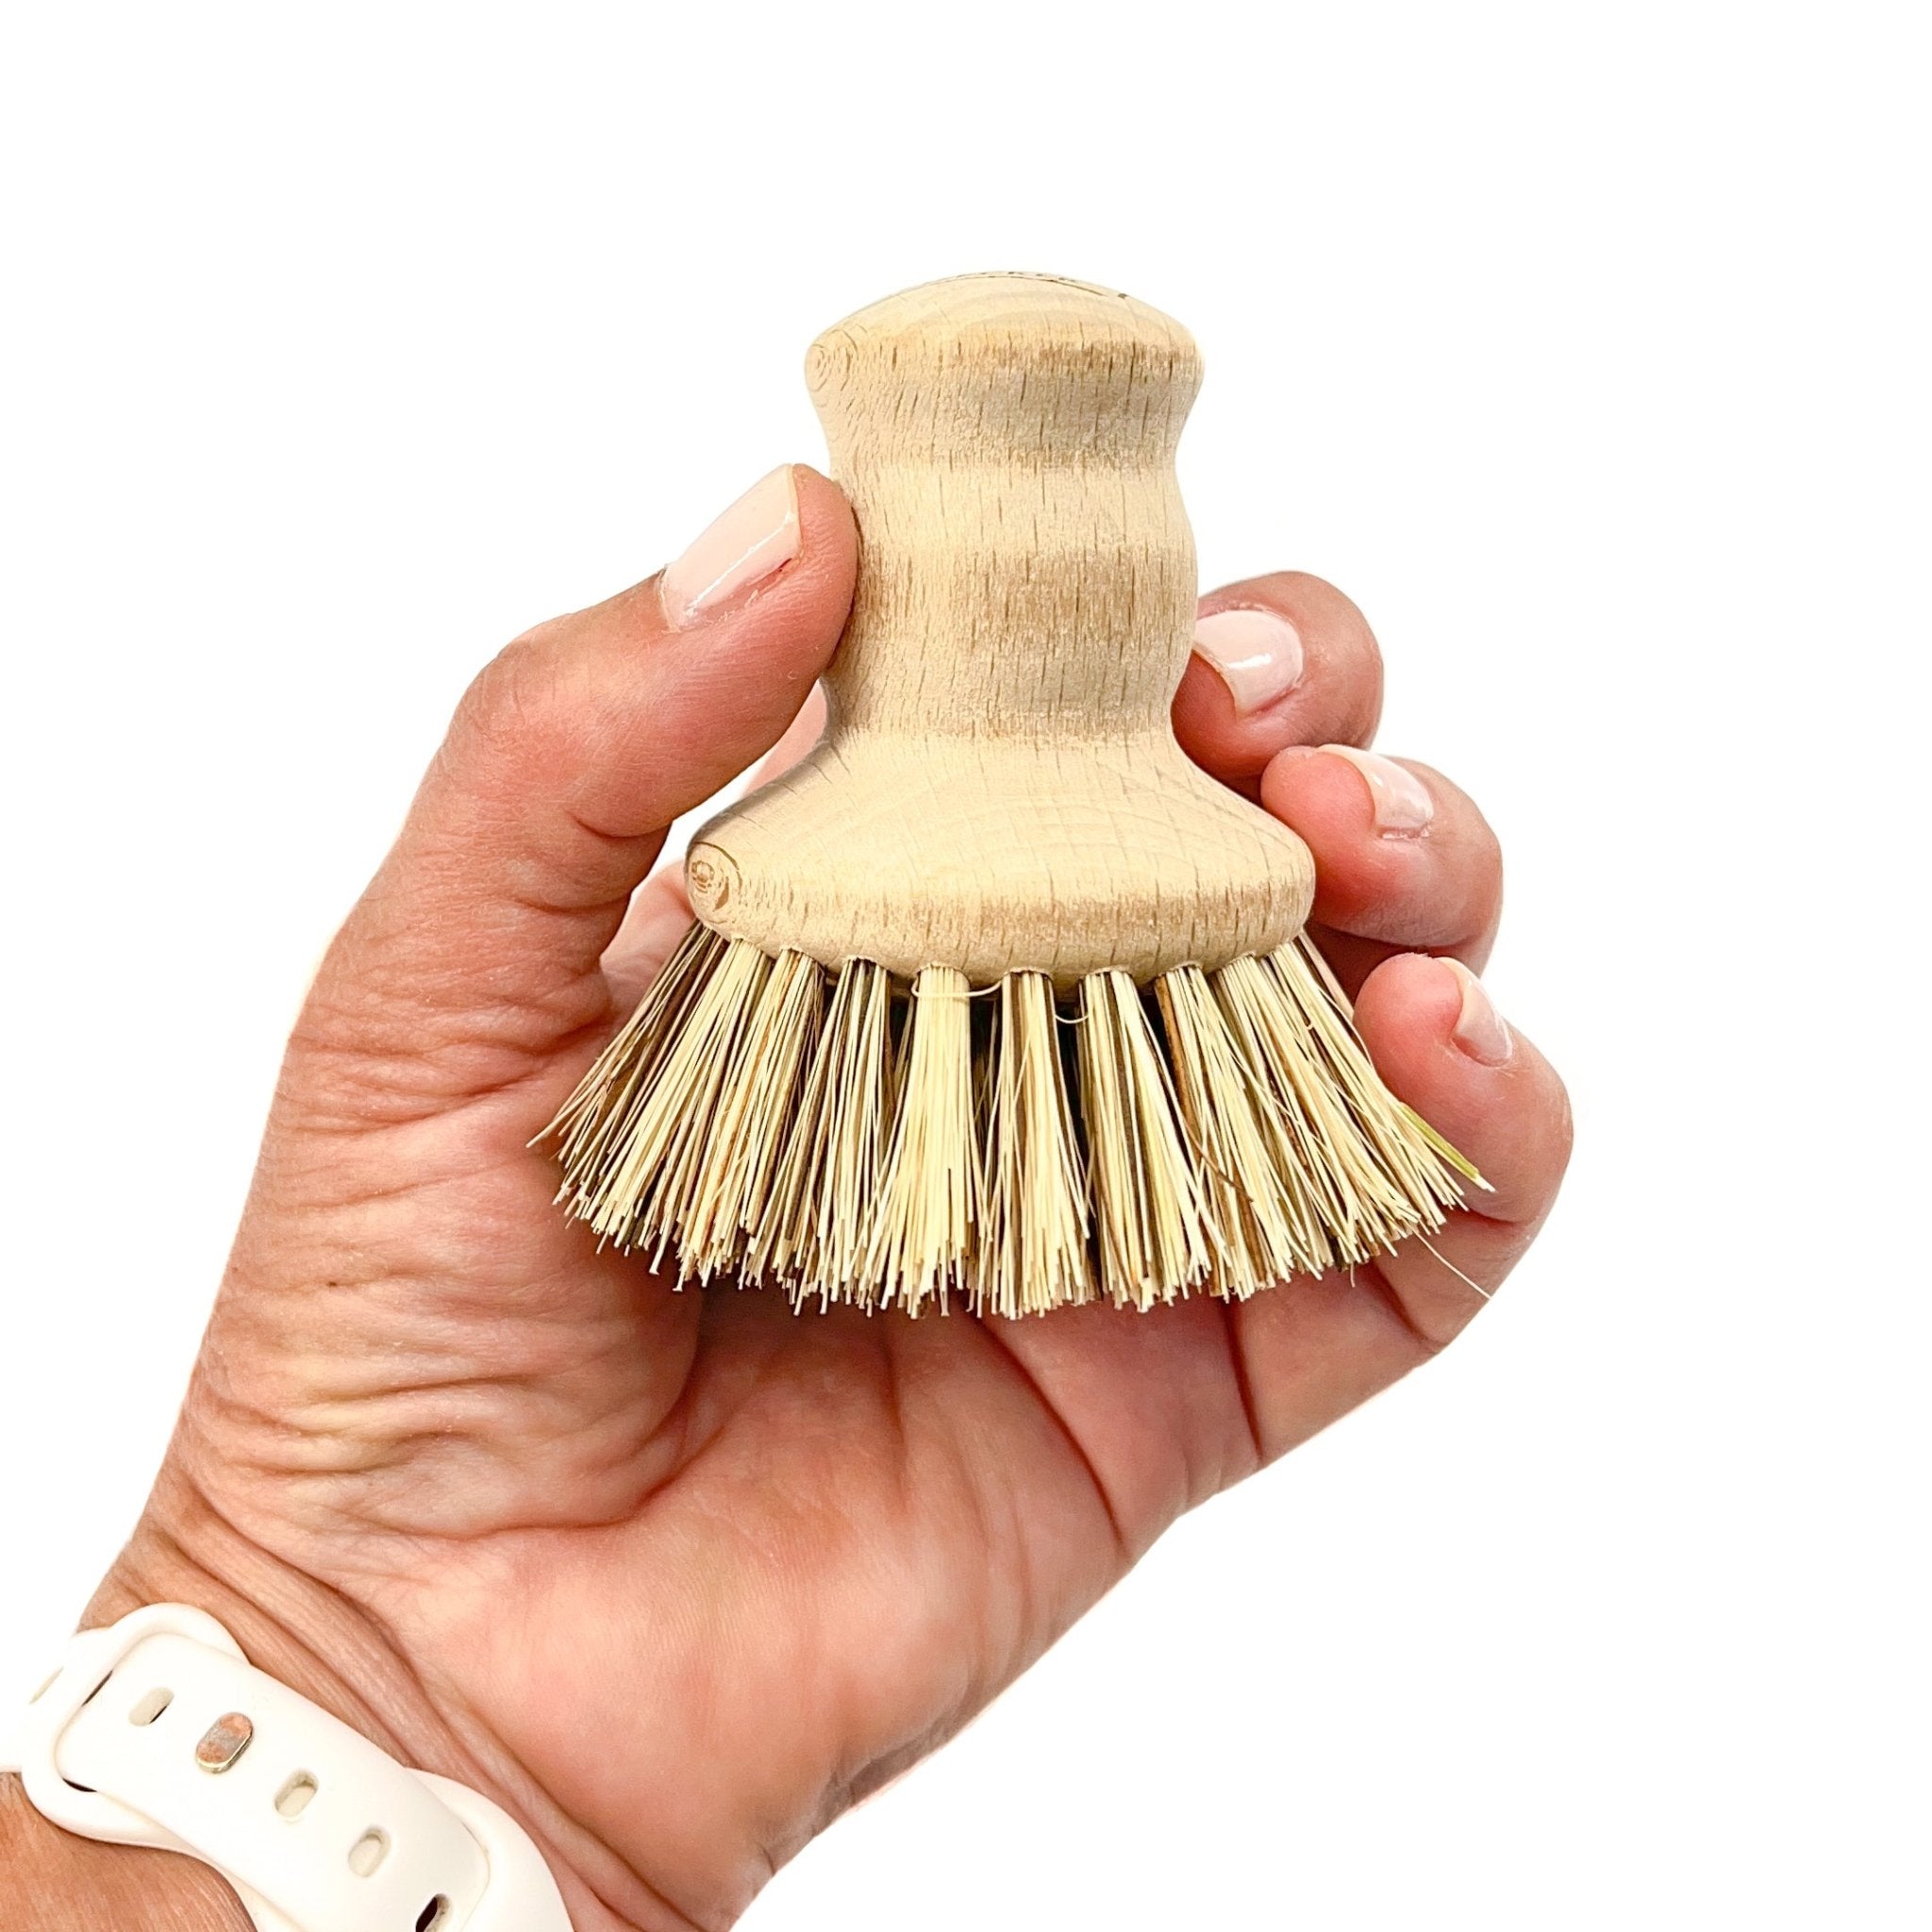 Dish Scrubber: Union Fiber - Marley's Monsters